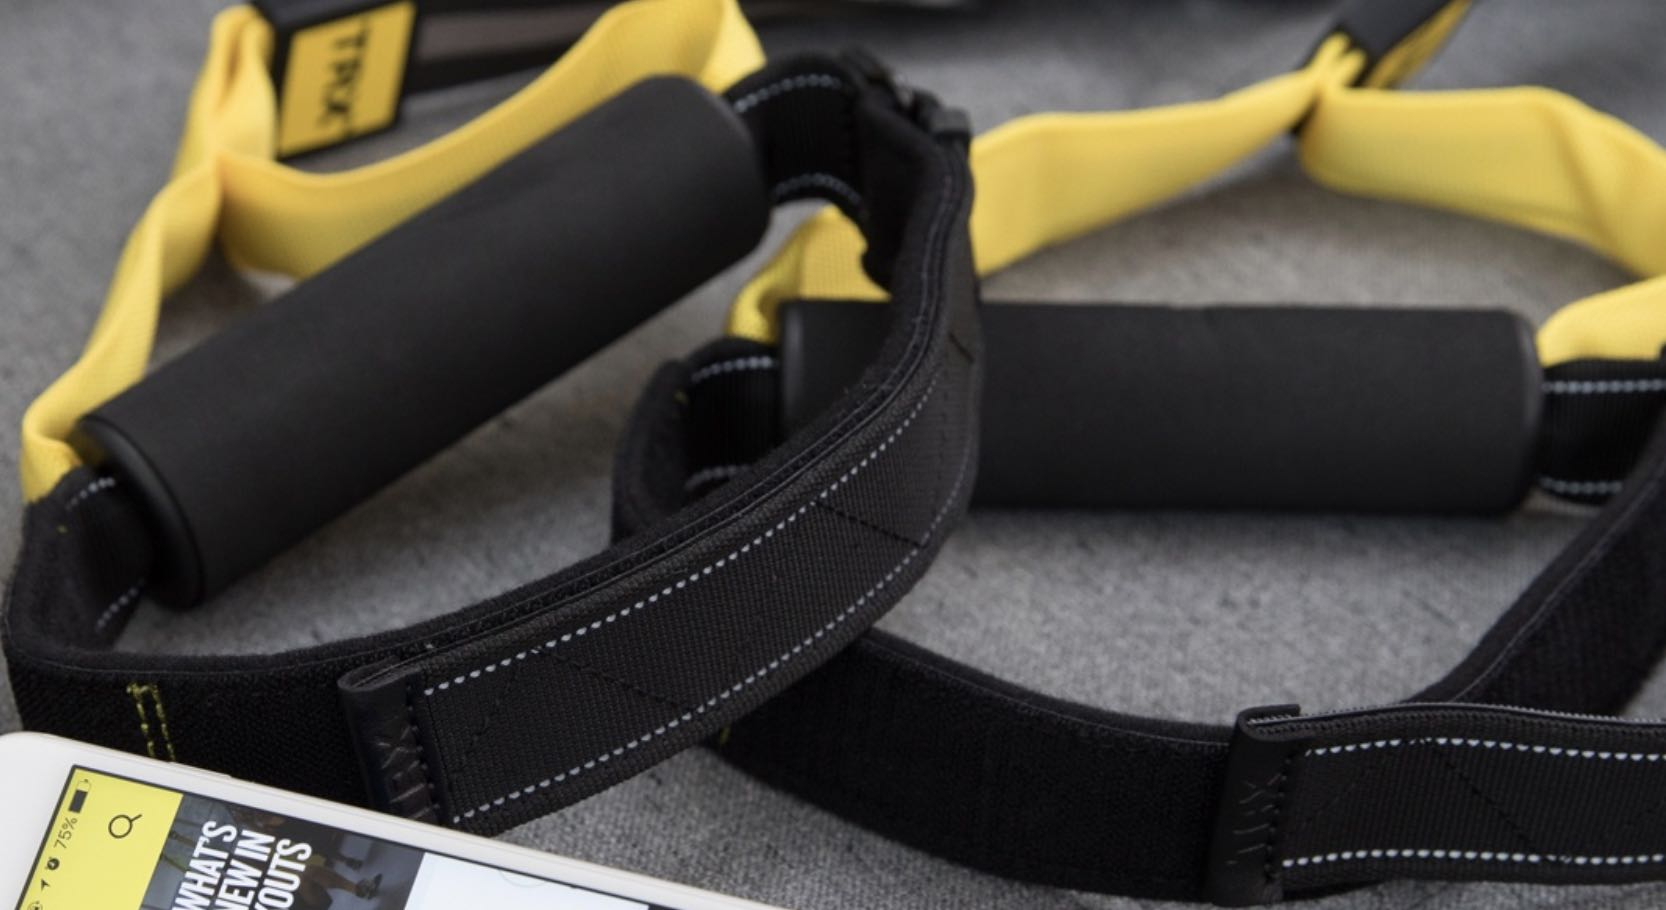 For the one who loves high-intensity training: TRX